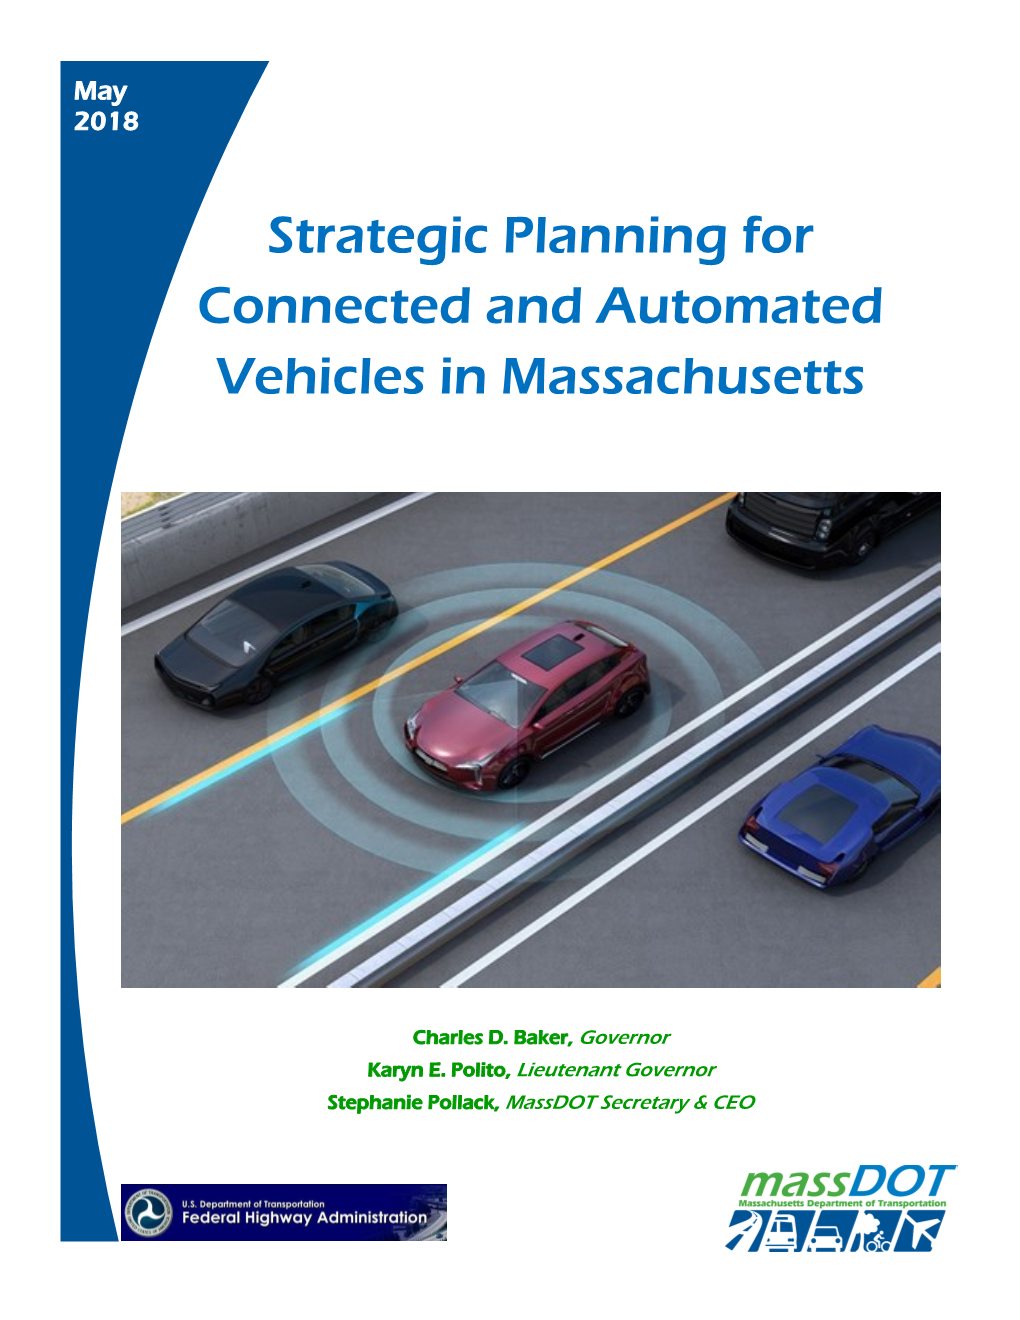 Strategic Planning for Connected and Automated Vehicles in Massachusetts